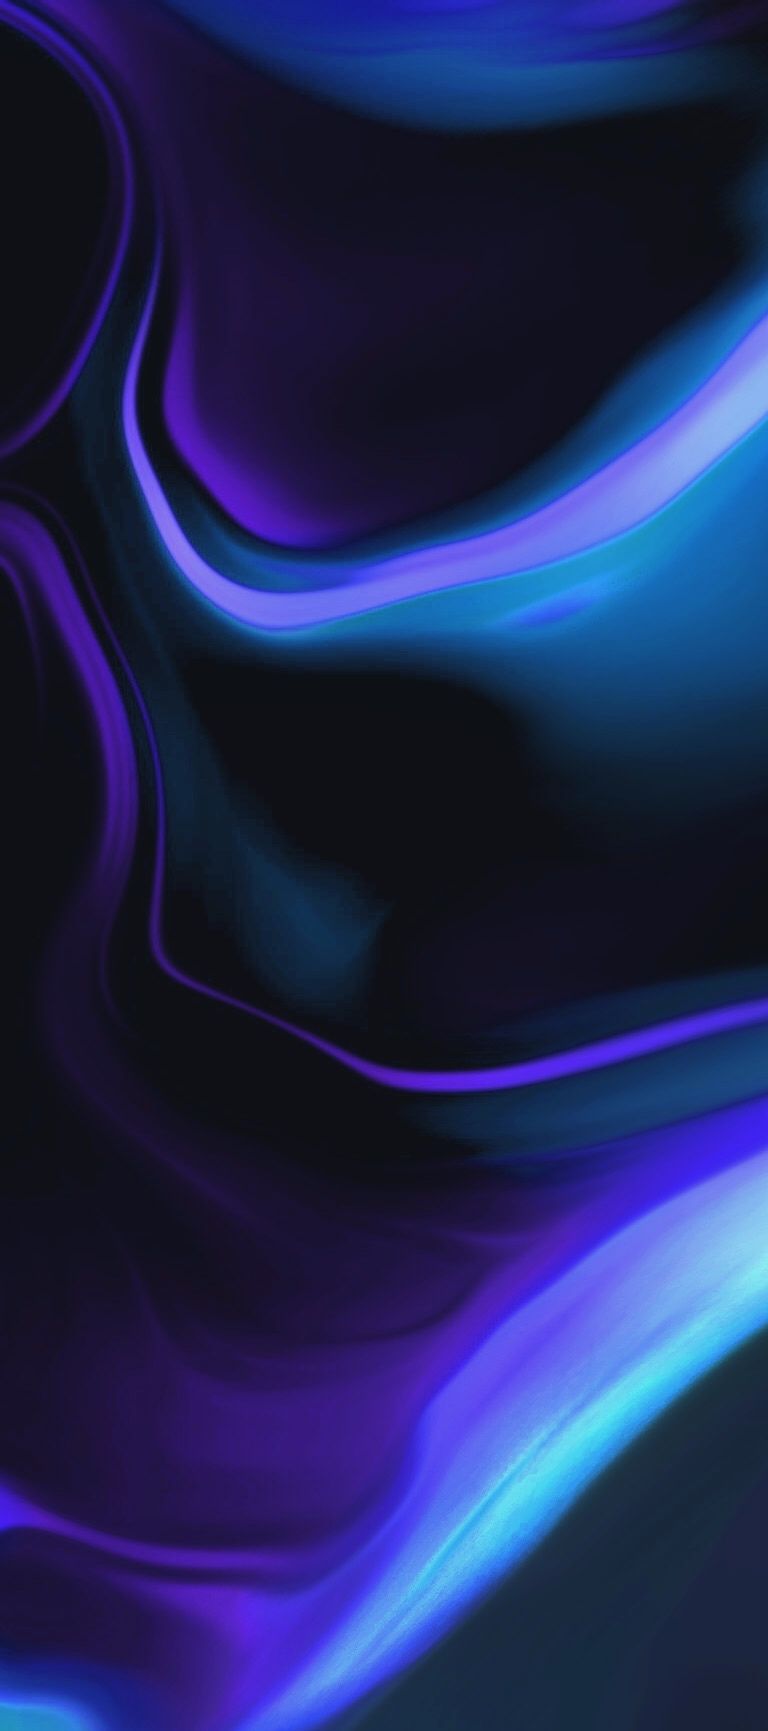 The Purple and black. Samsung wallpaper, Background phone wallpaper, Phone wallpaper